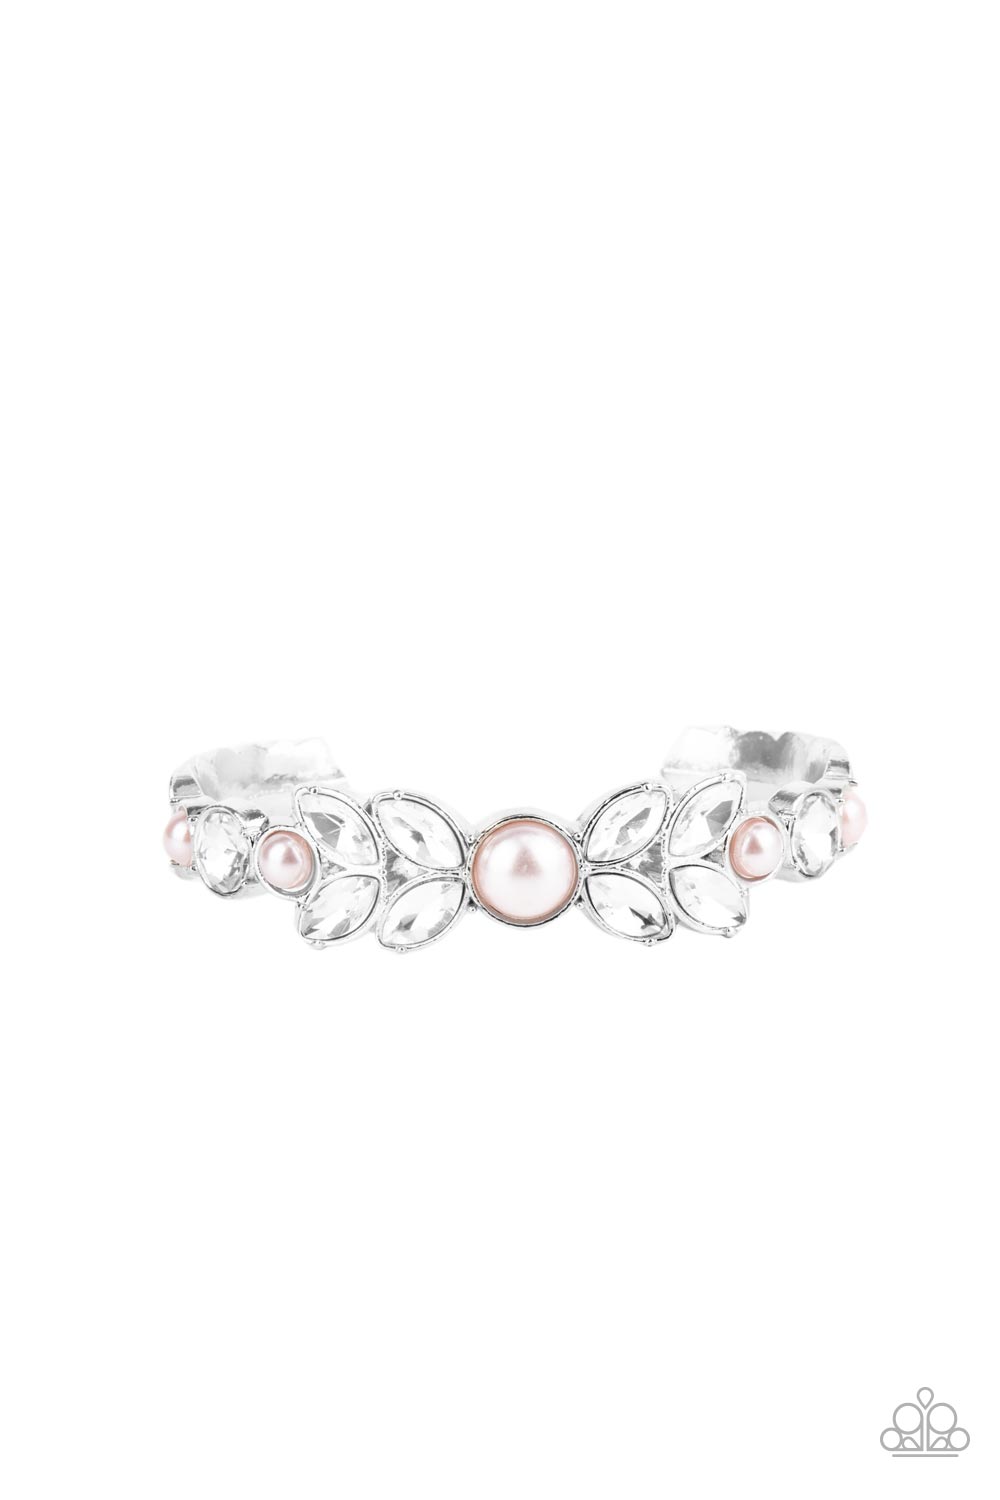 Regal Reminiscence - Pink Pearl - Silver Sparkly Rhinestone Cuff Bracelet - Paparazzi Accessories - Bubbly pink pearls, a collection of round and marquise style white rhinestones coalesce into a sparkly statement flanked by leafy silver frames that curve into a decorative cuff fashion bracelet.